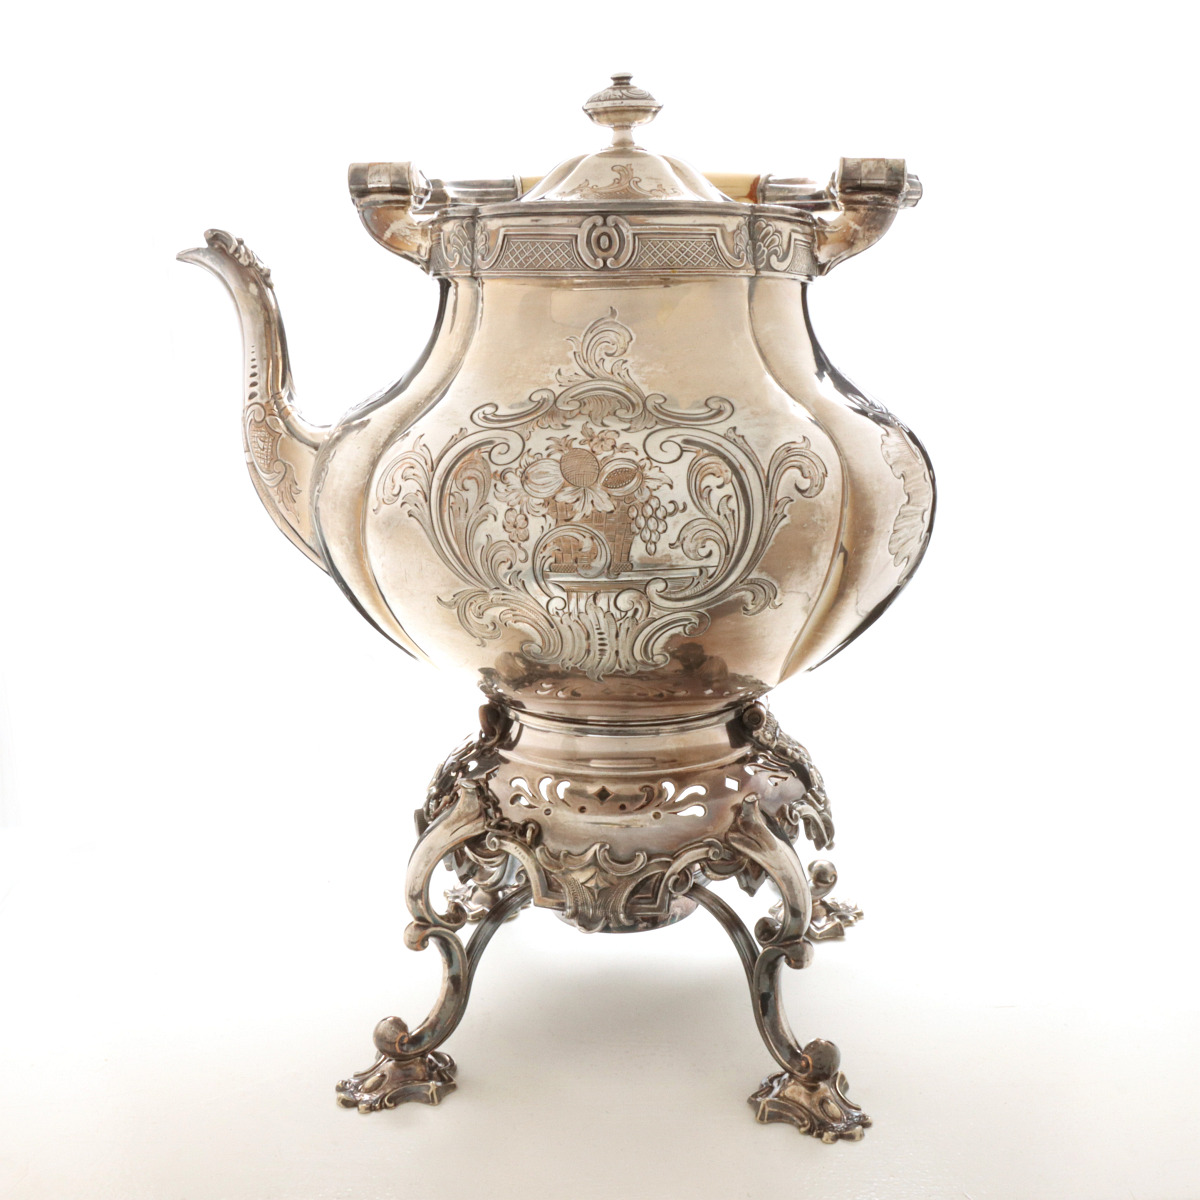 AN EARLY 20TH C. SILVER PLATED TIPPING TEAKETTLE